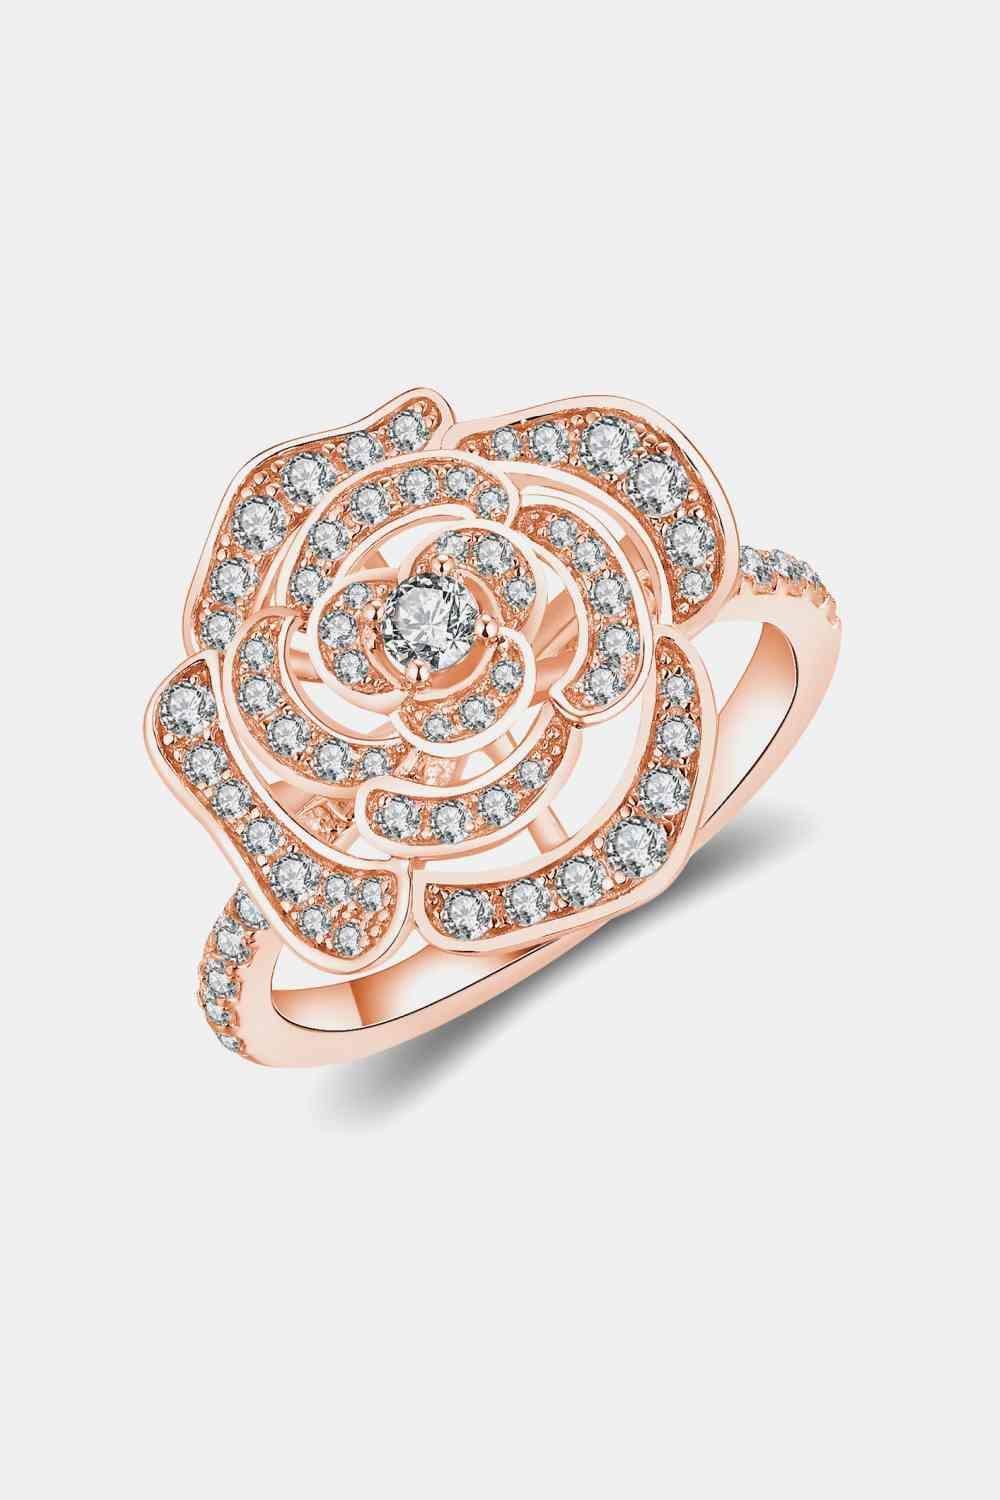 a rose shaped ring with diamonds on it